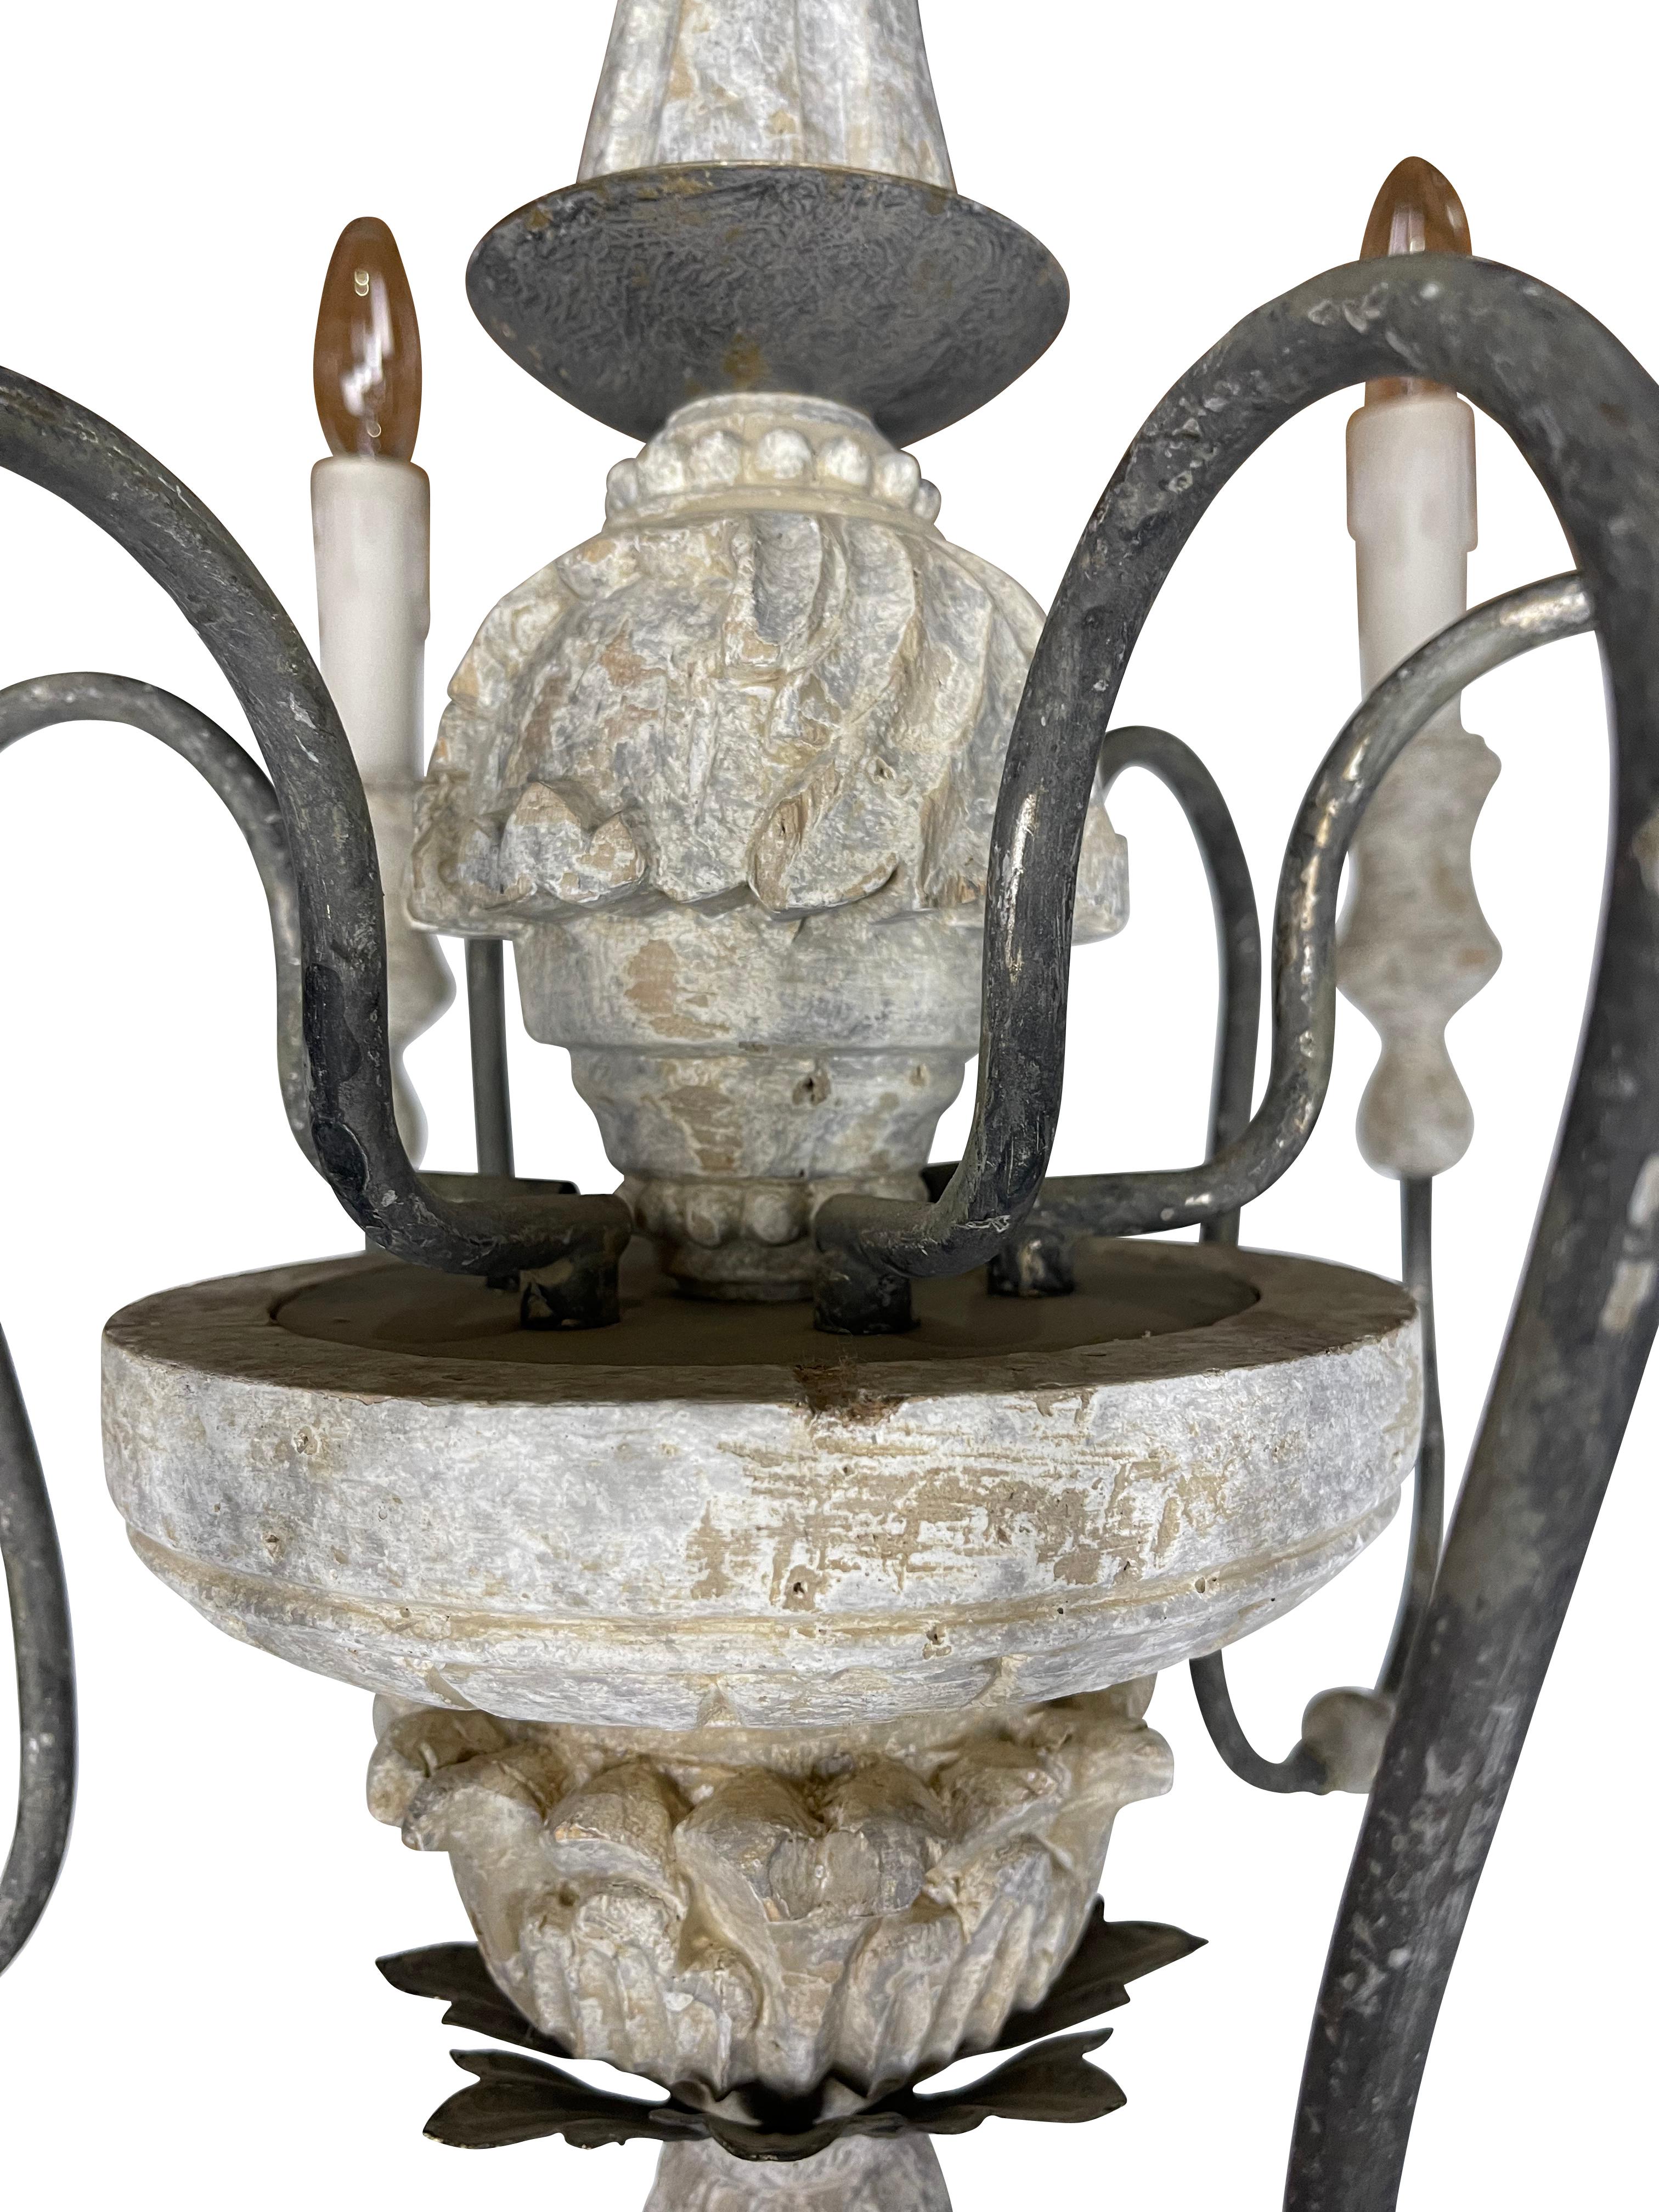 This rustic French country grey painted chandelier is nicely carved with foliate designs on the base. Graceful iron six arm chandelier with original burlap shades adds warmth and charm to any country interior space. Nice diminutive size measures